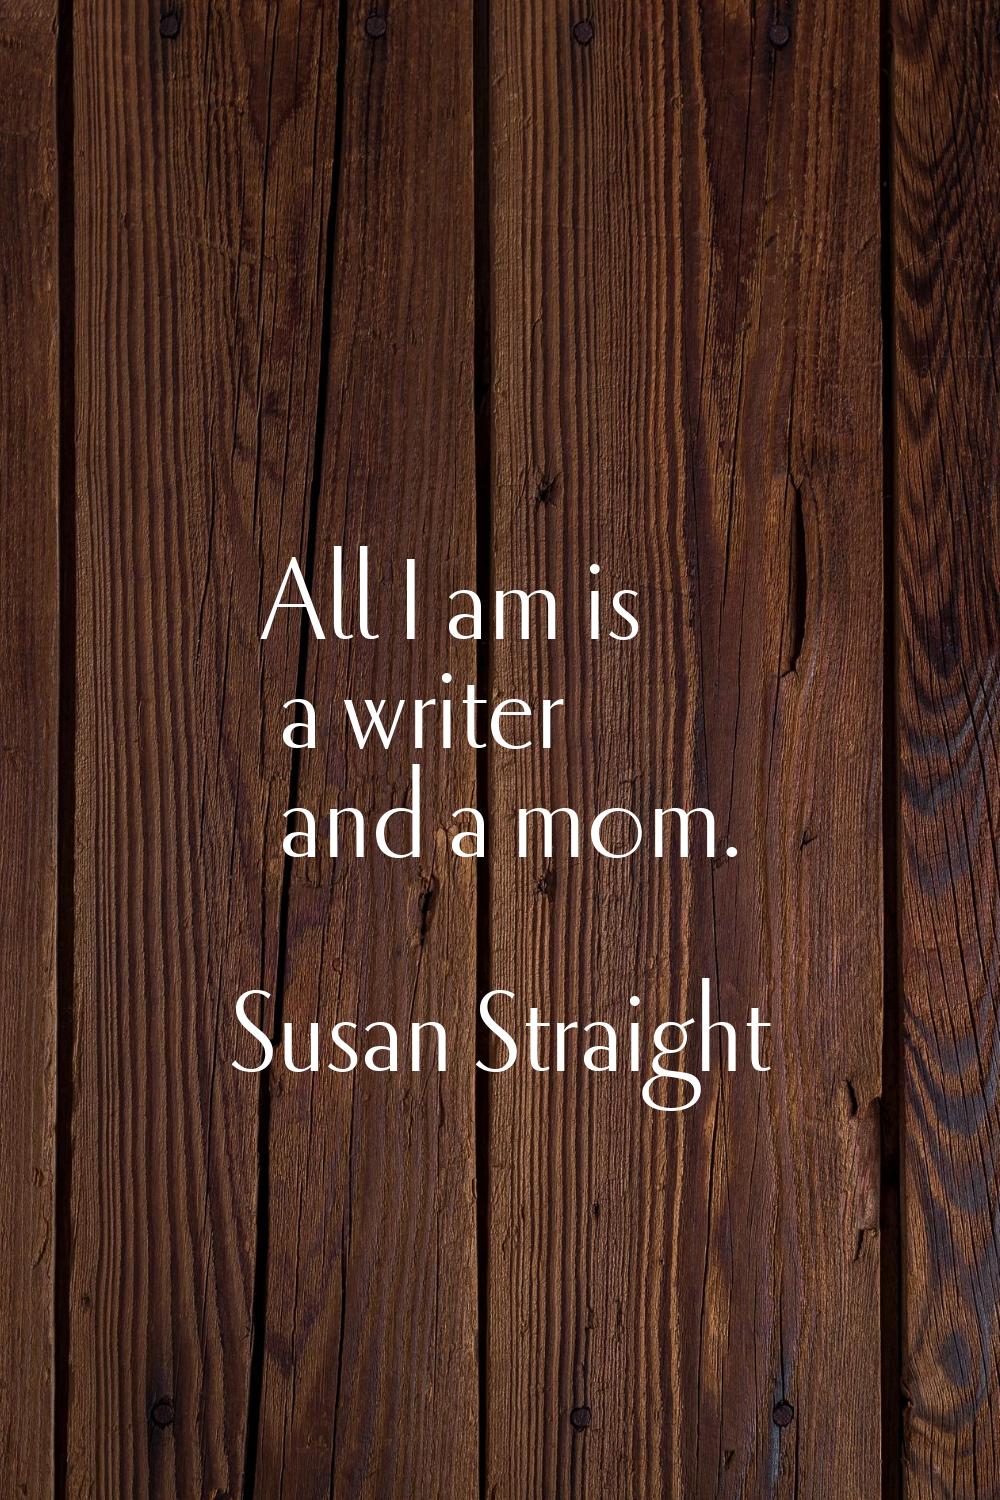 All I am is a writer and a mom.